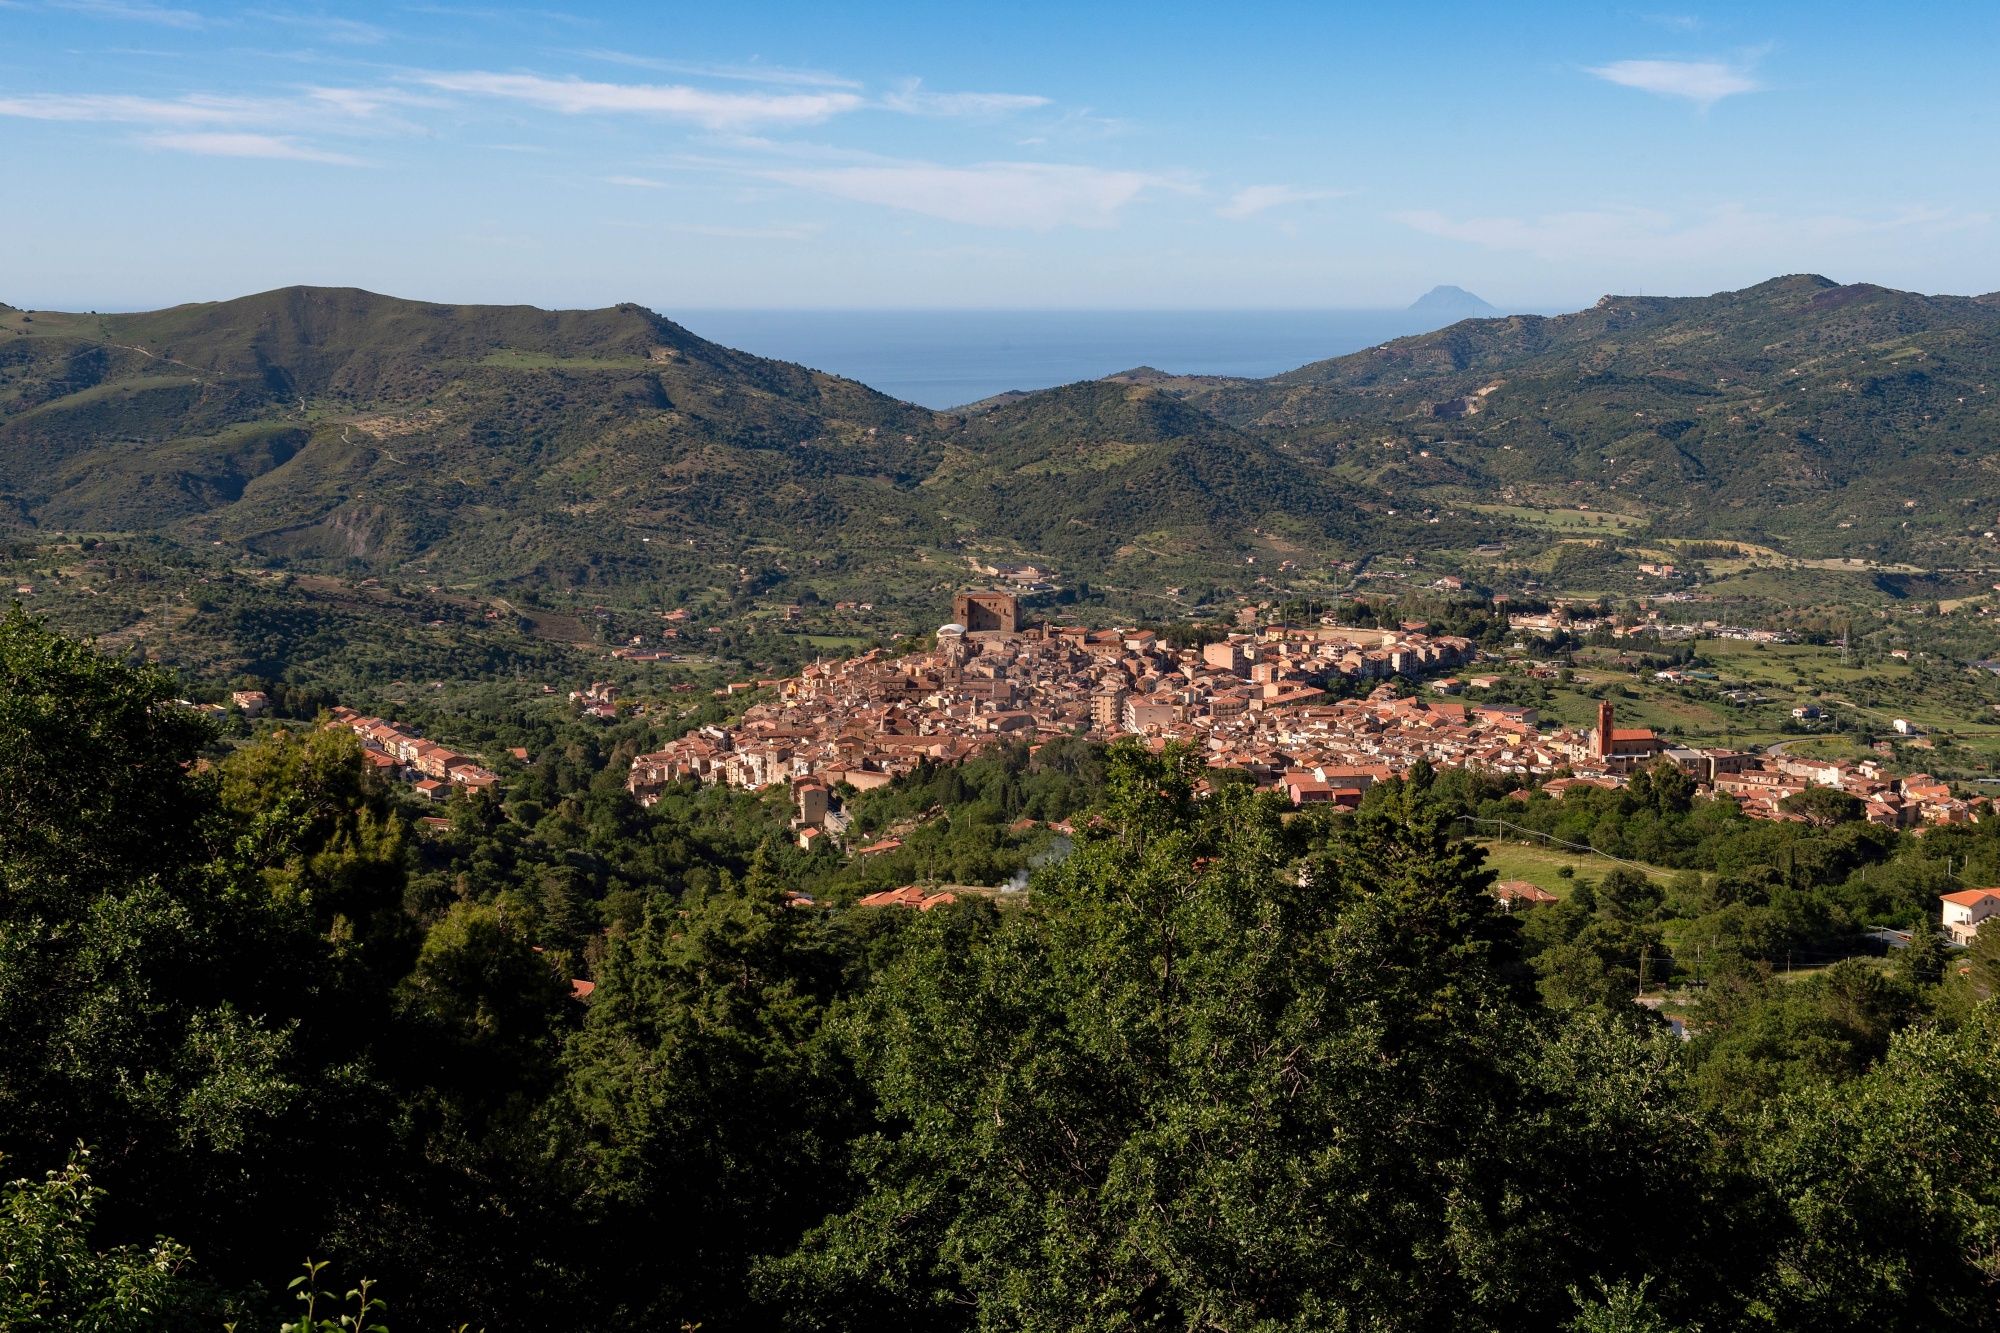 The Medieval hamlet of Castelbuono, perched in the mountains of Sicily, Italy.